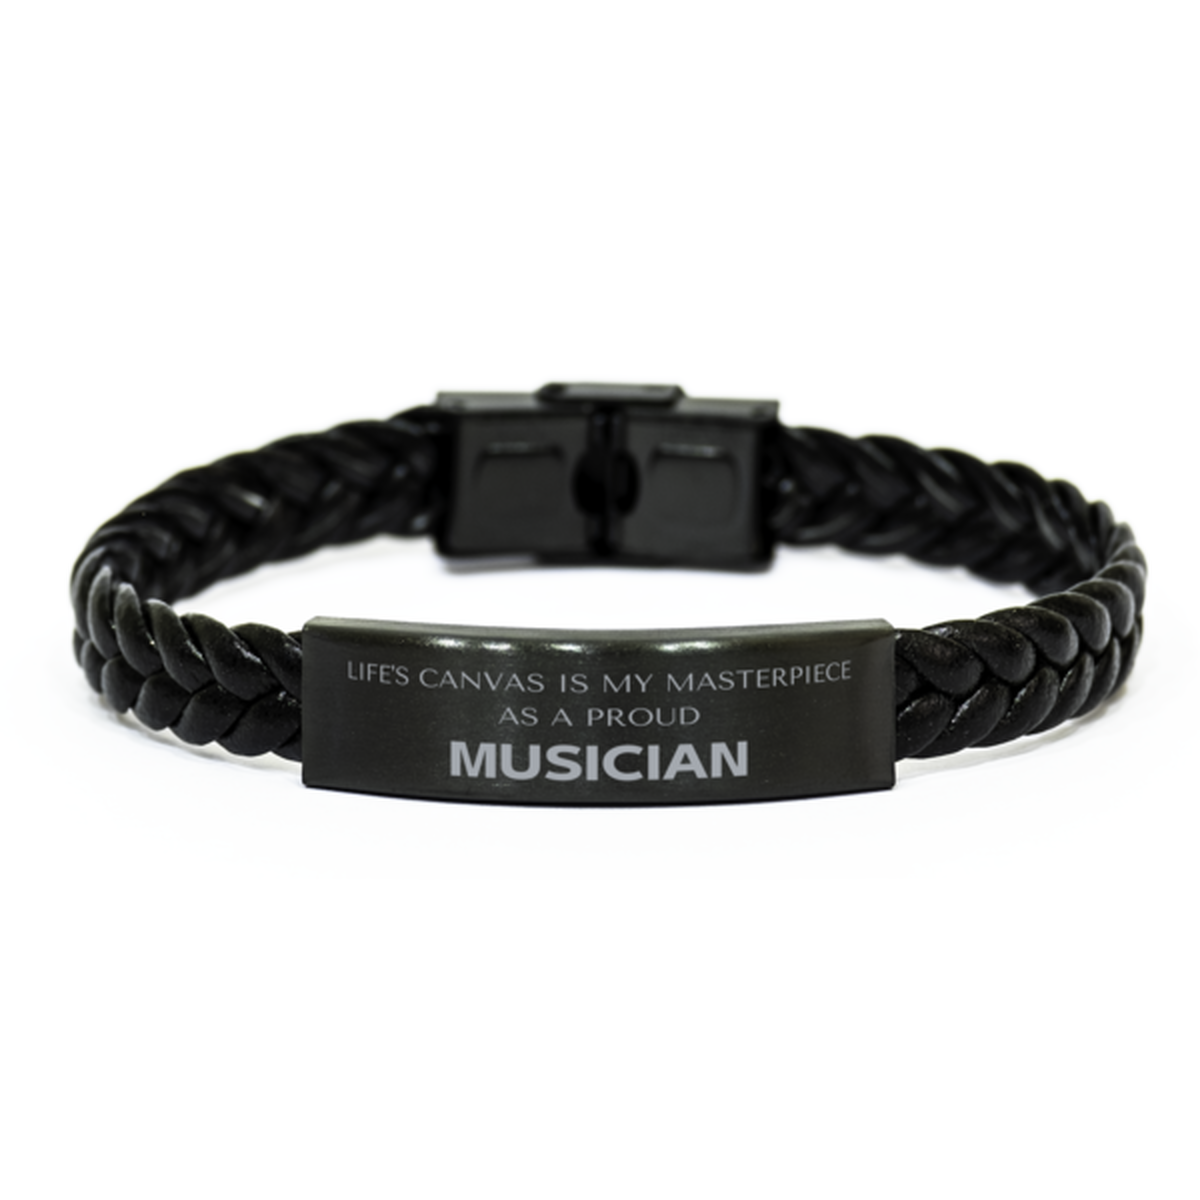 Proud Musician Gifts, Life's canvas is my masterpiece, Epic Birthday Christmas Unique Braided Leather Bracelet For Musician, Coworkers, Men, Women, Friends